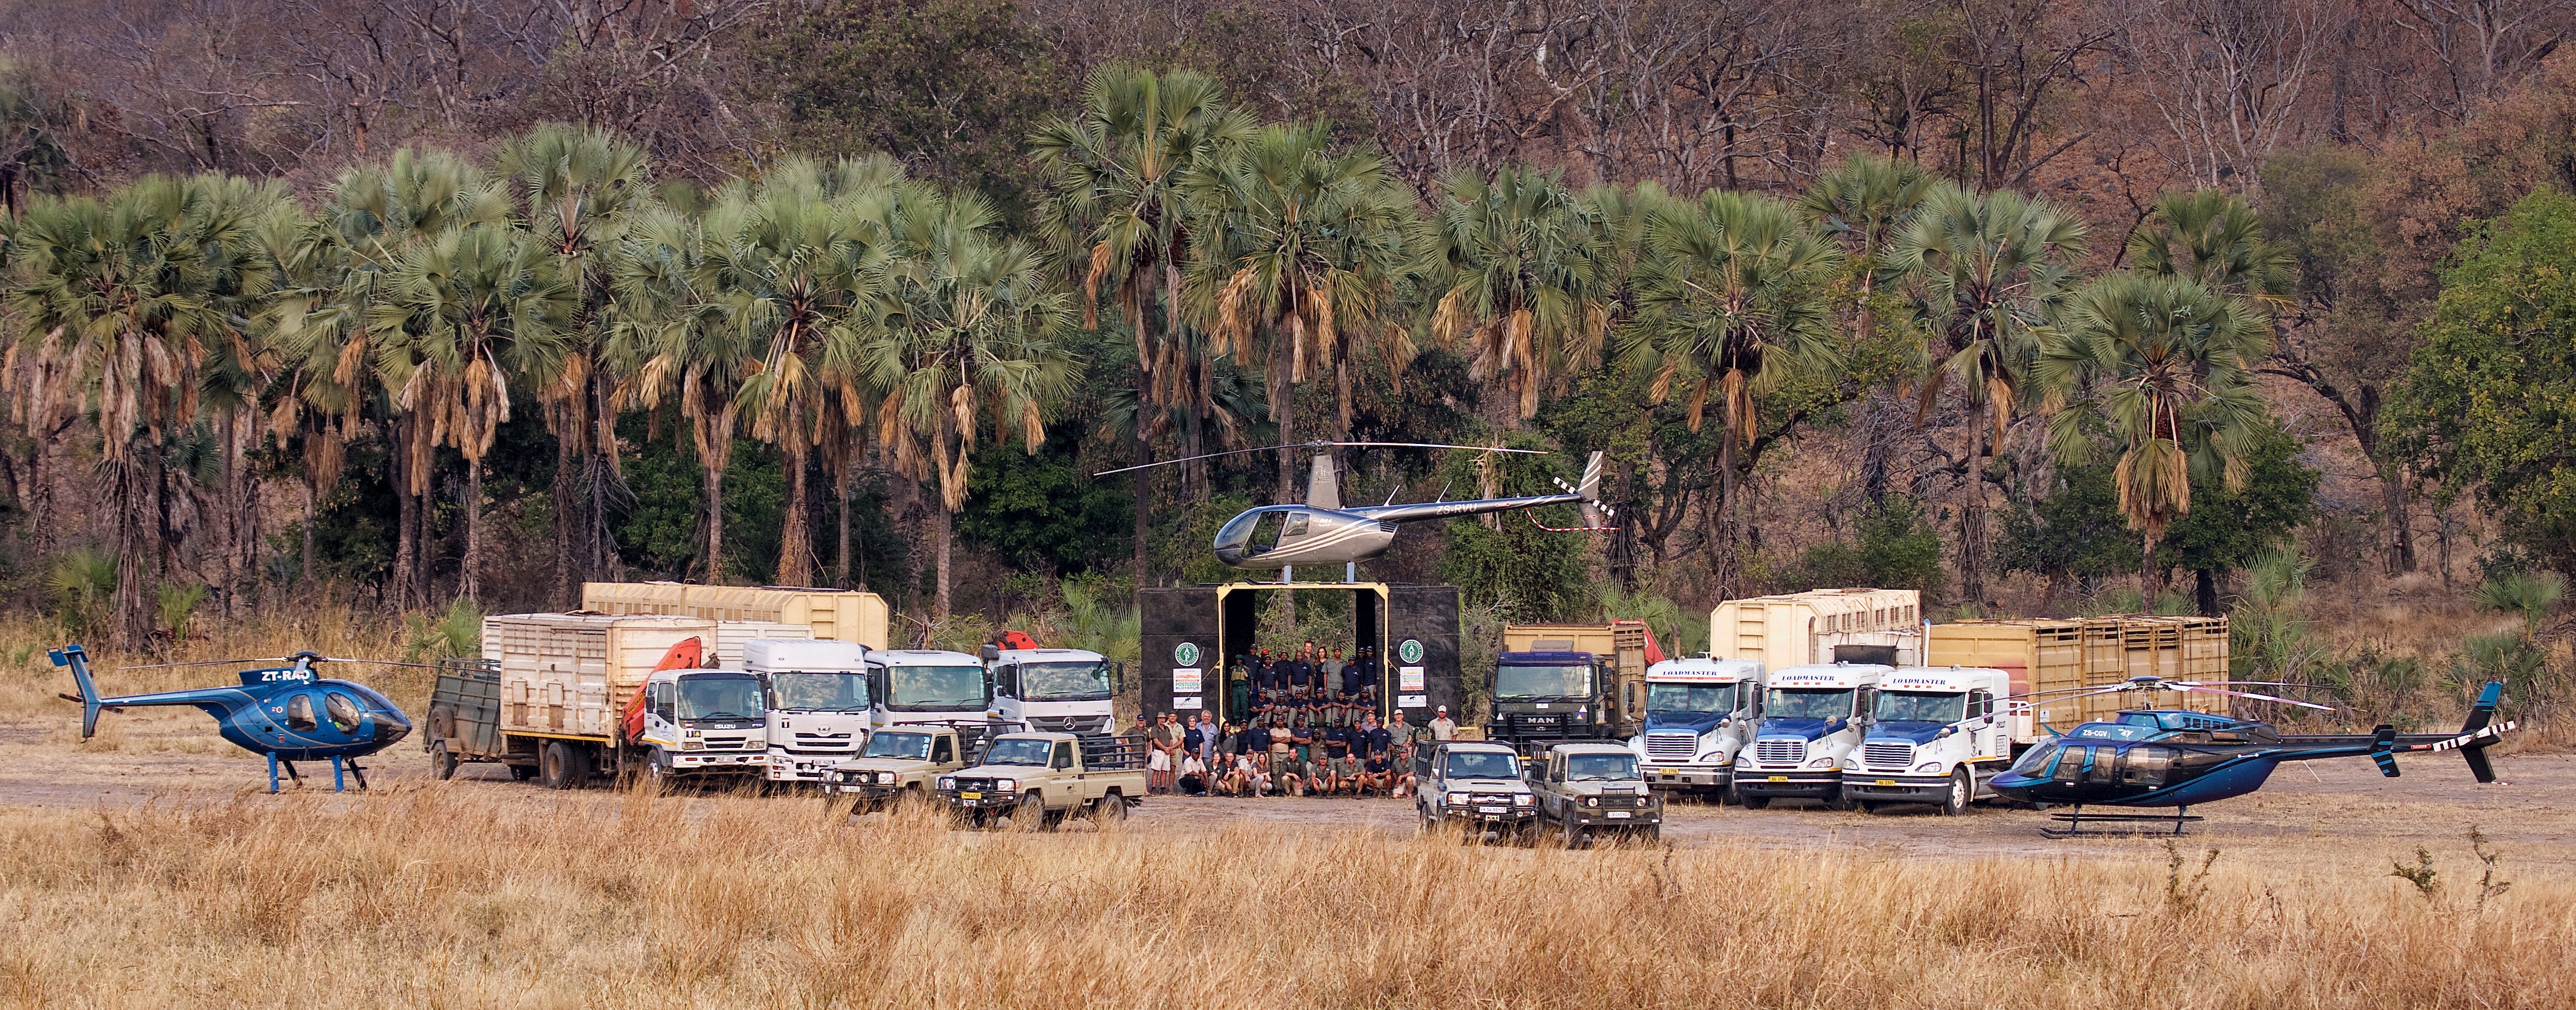 What it takes to move 500 elephants: all this equipment was brought up from South Africa as part of this massive operation. Photo by Frank Weitzer.